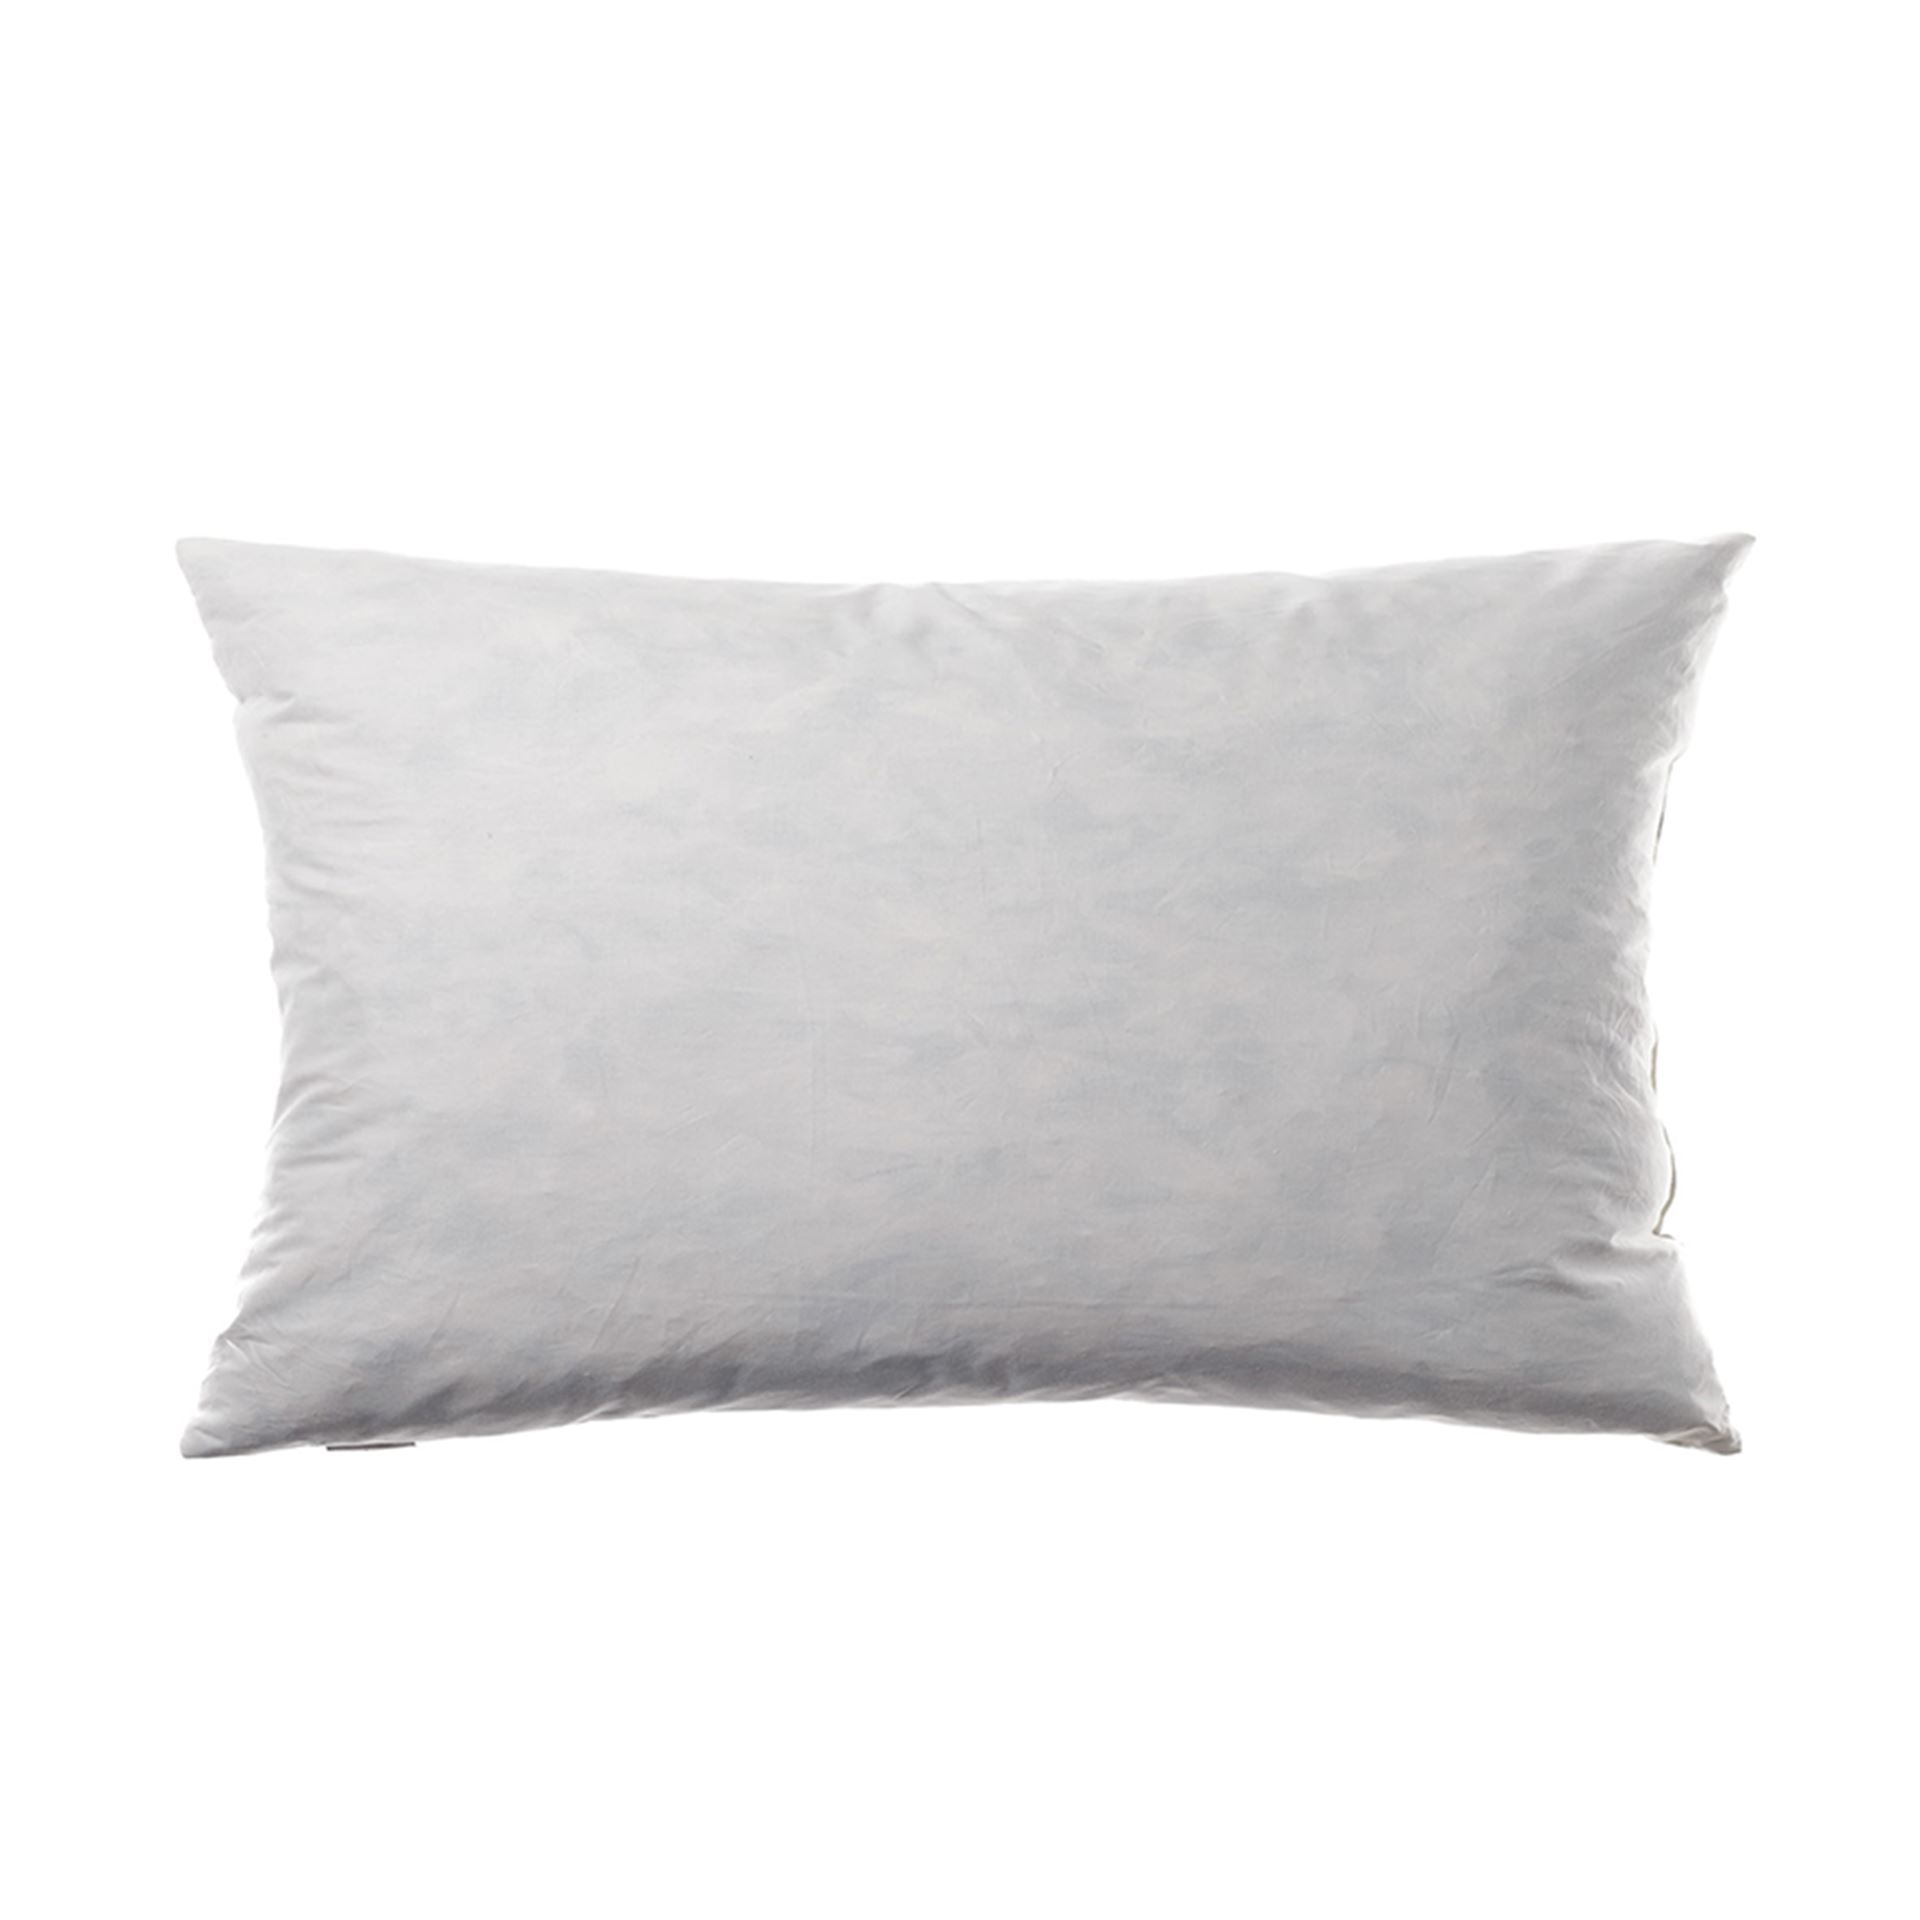 100% European Duck Down Feather Filled Cushion Inserts